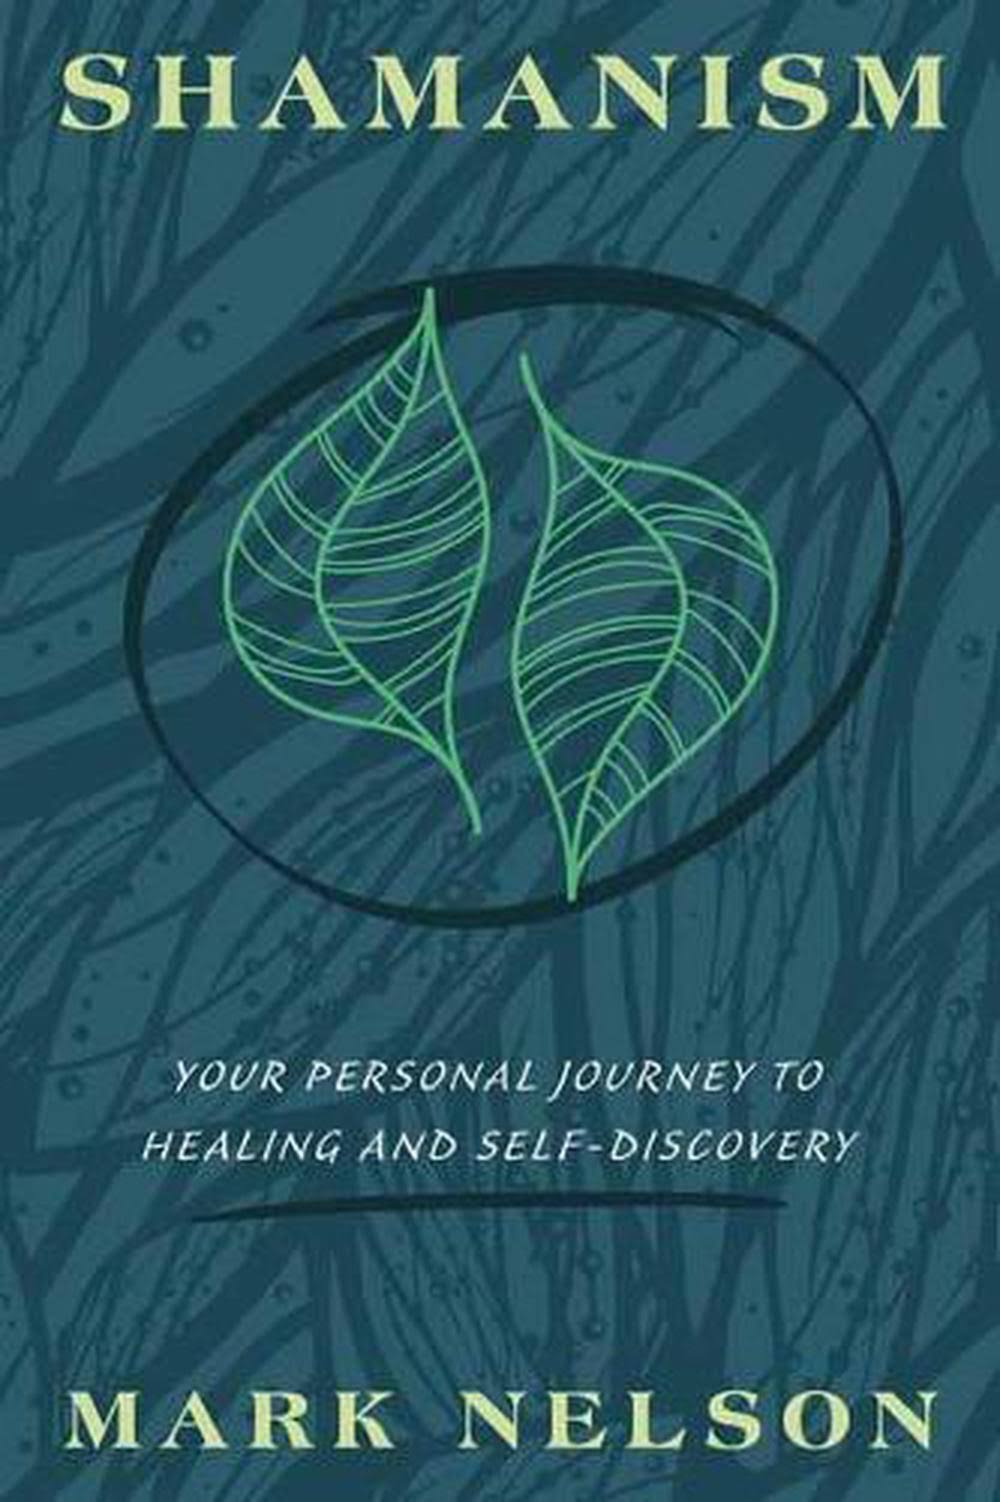 Shamanism: Your Personal Journey to Healing and Self-Discovery [Book]